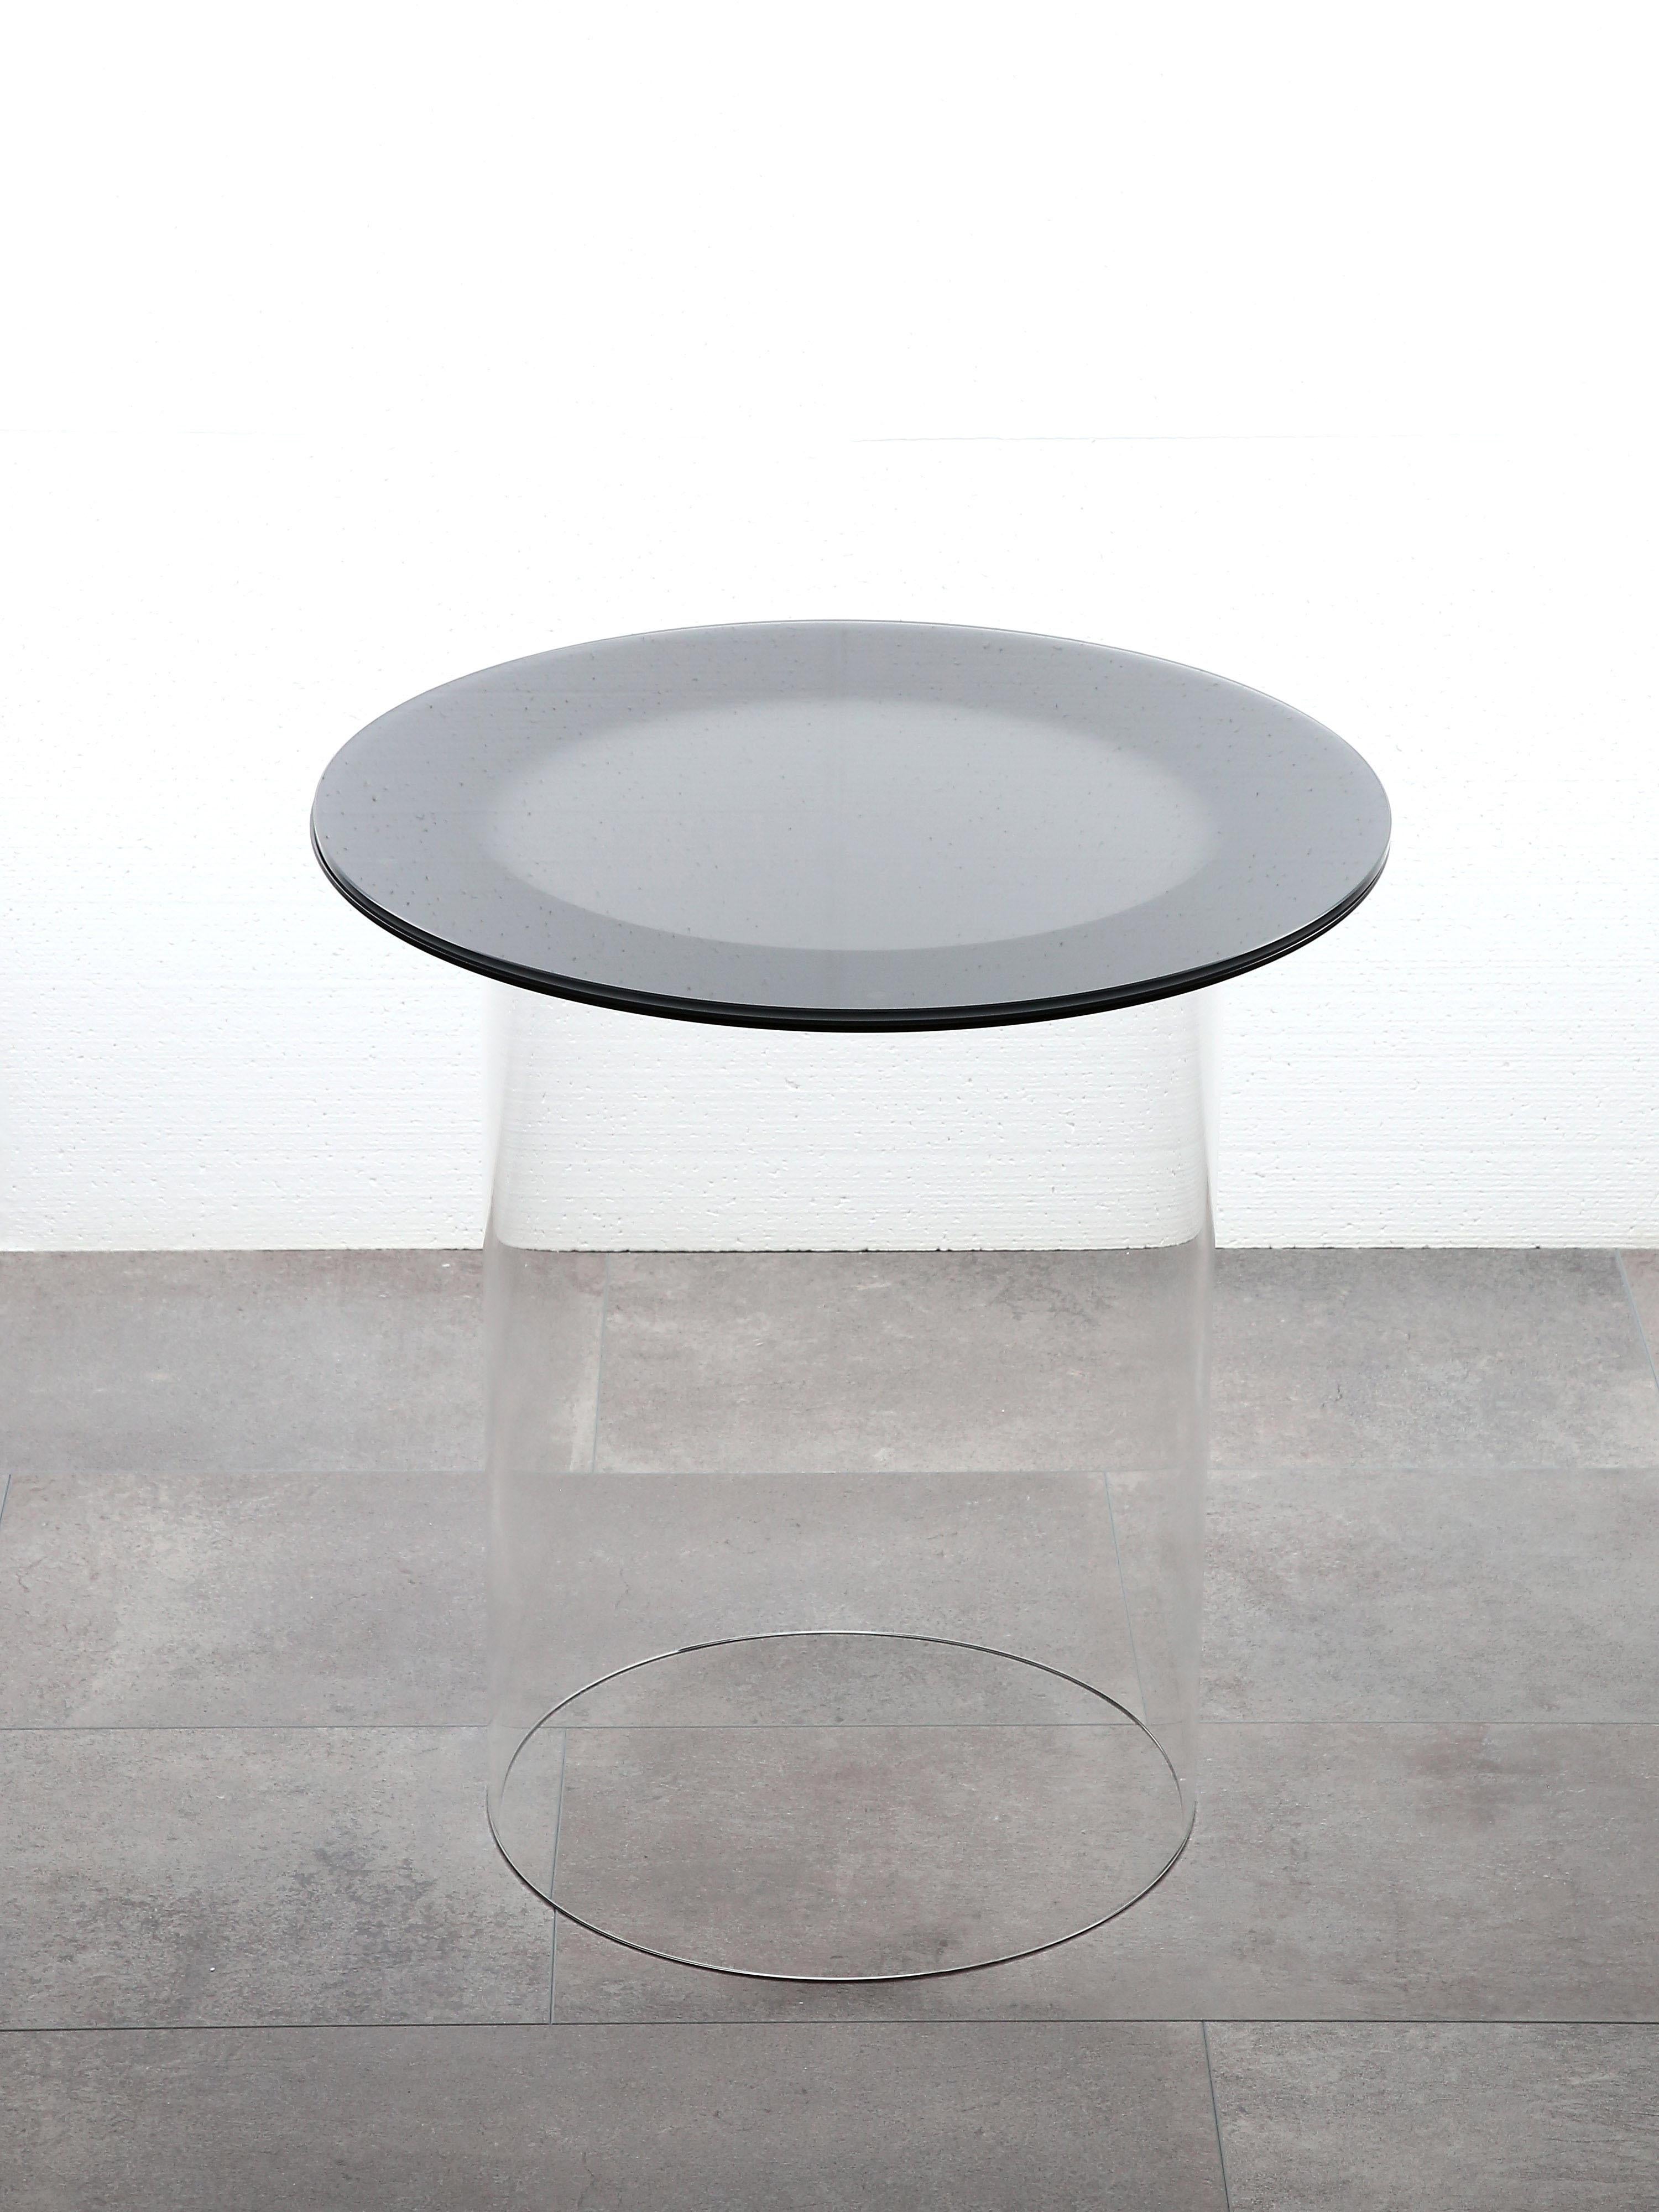 Modern Round Side Table with Glass and Black Finish In New Condition For Sale In Weinheim, DE